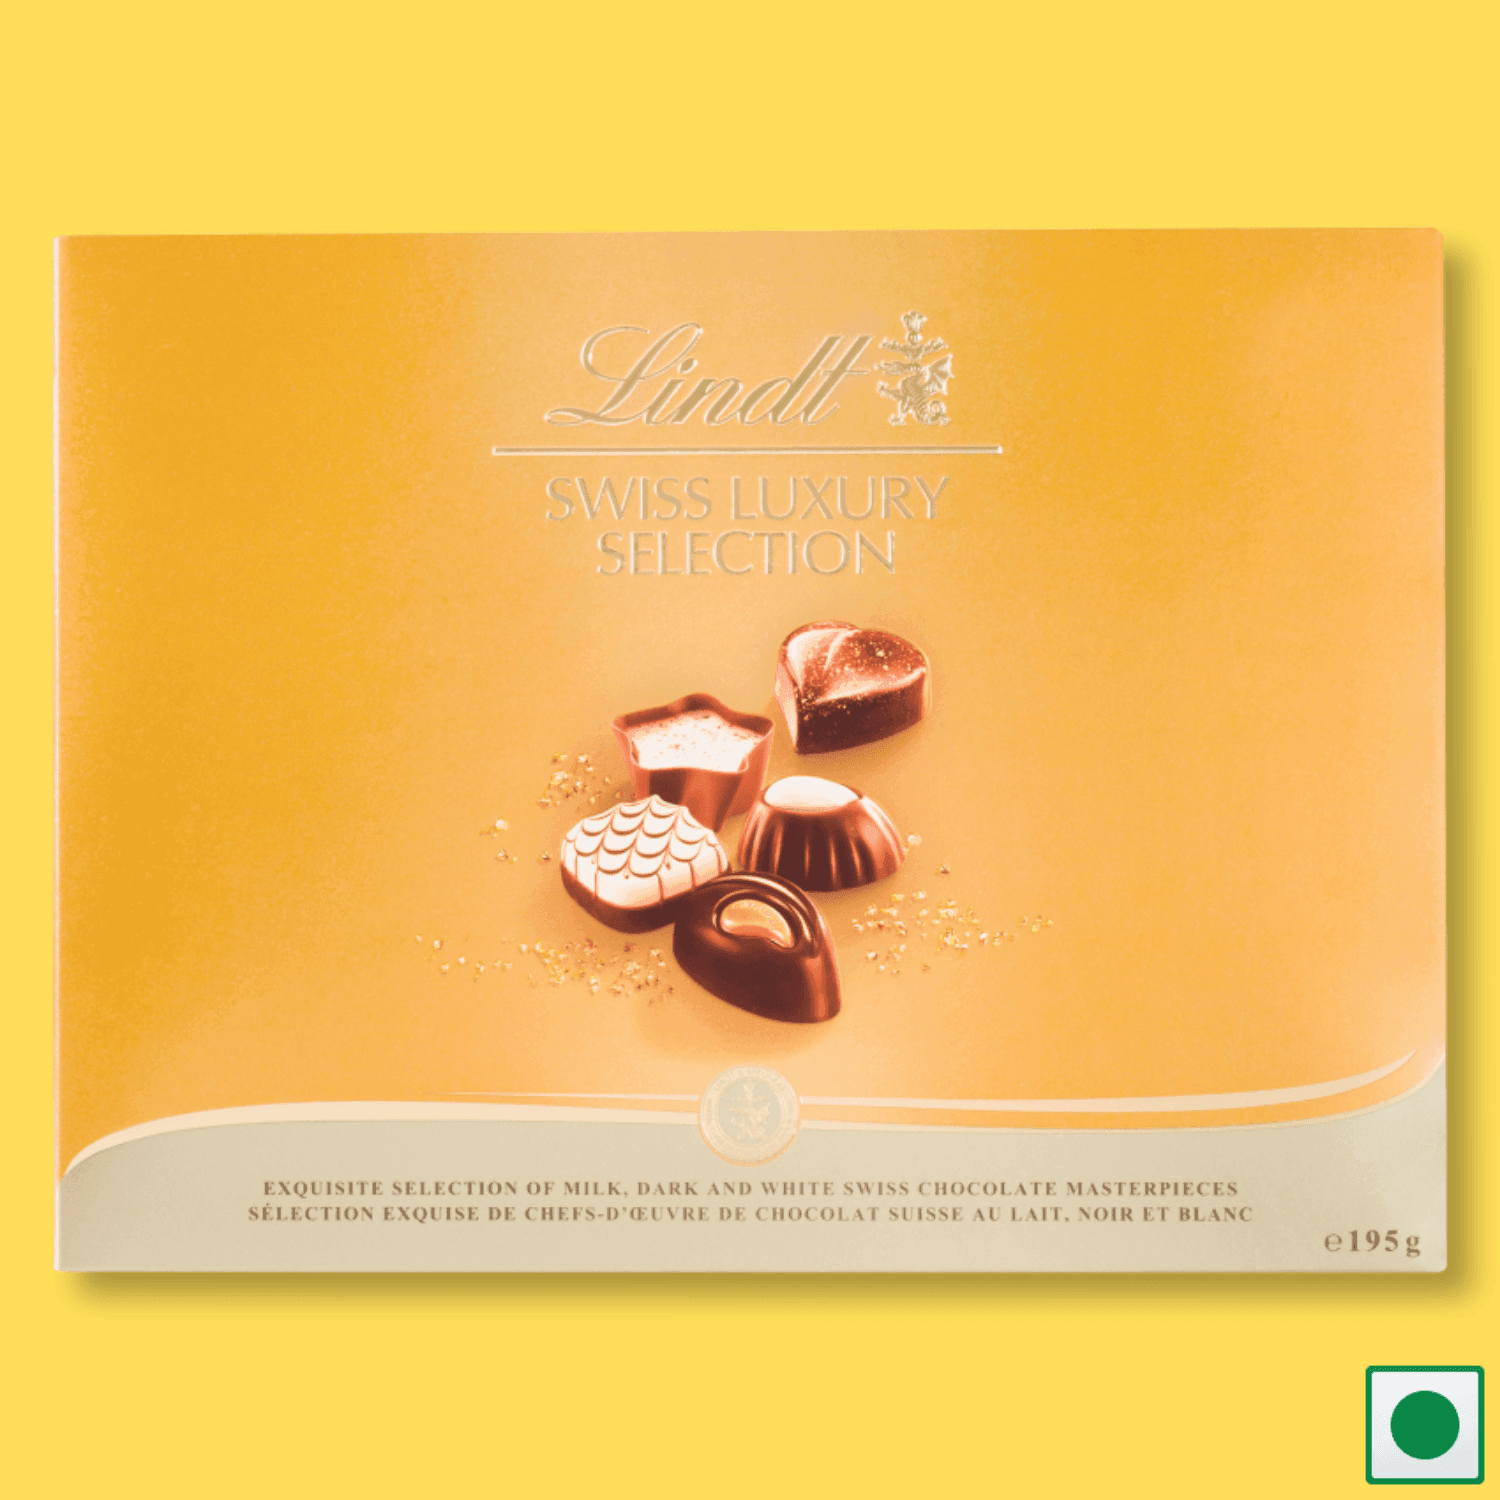 Lindt Swiss Luxury Selection Box, 195g (Imported) - Super 7 Mart